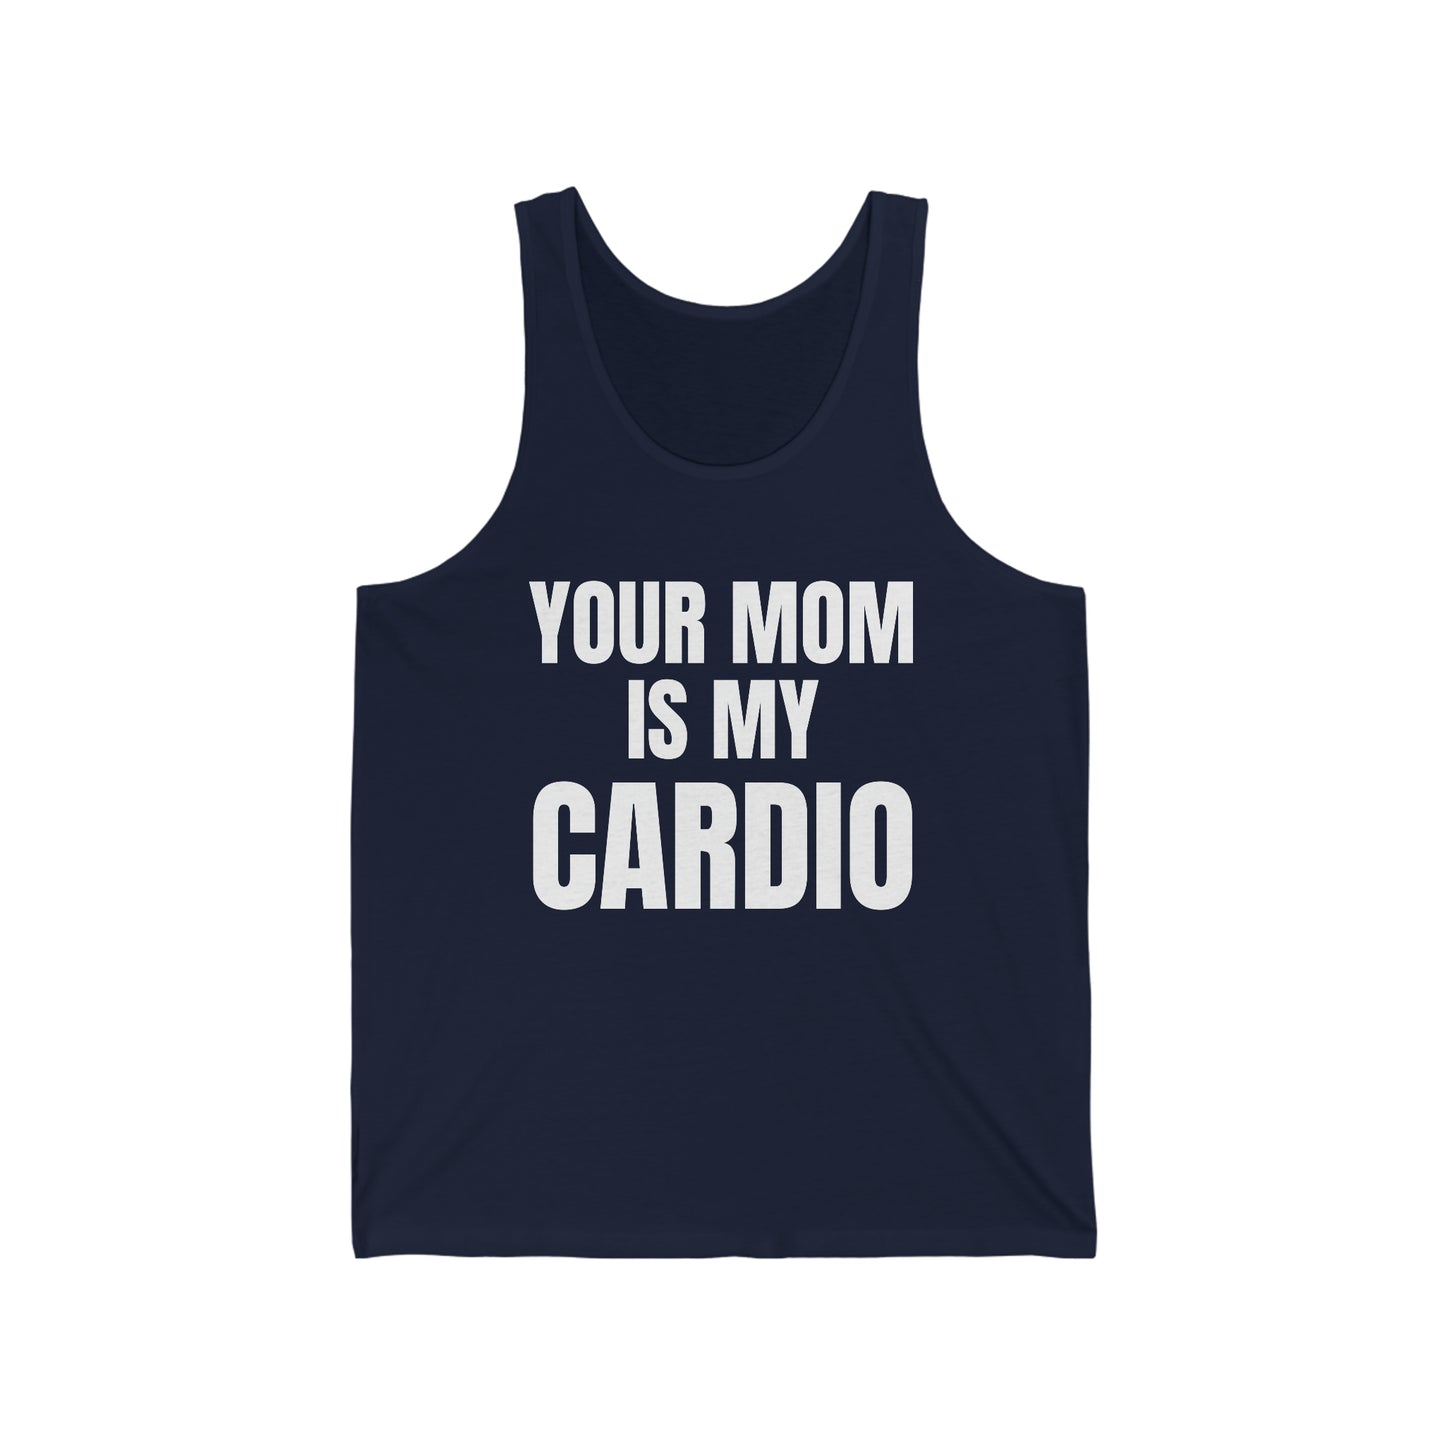 "Your Mom Is My Cardio" Unisex Jersey Tank